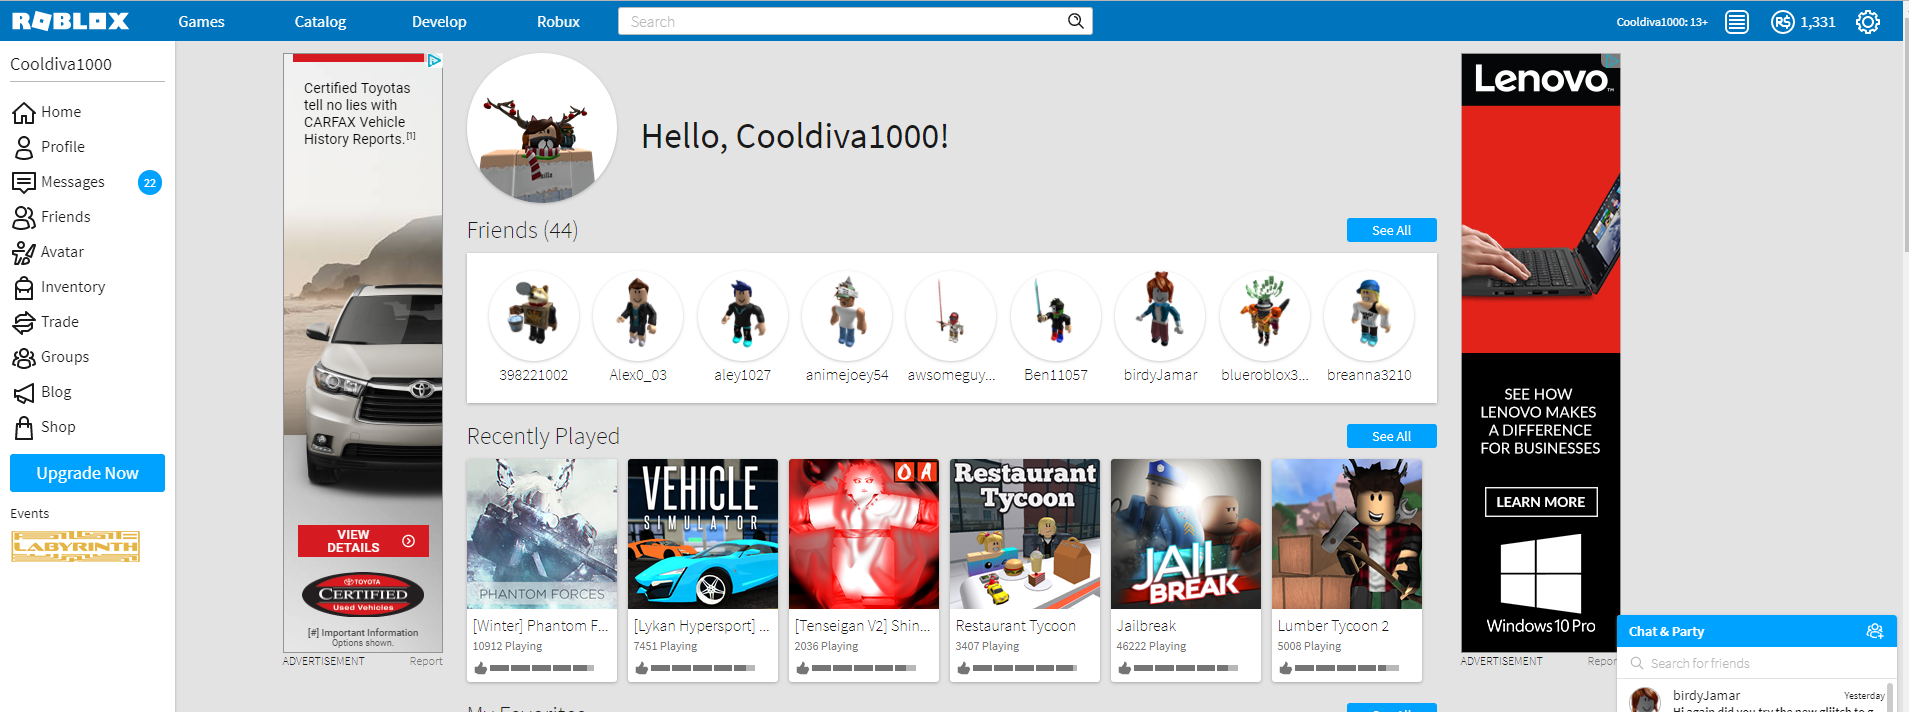 Selling High End 2009 2009 Roblox Female Account Playerup Accounts Marketplace Player 2 Player Secure Platform - playing roblox 2009